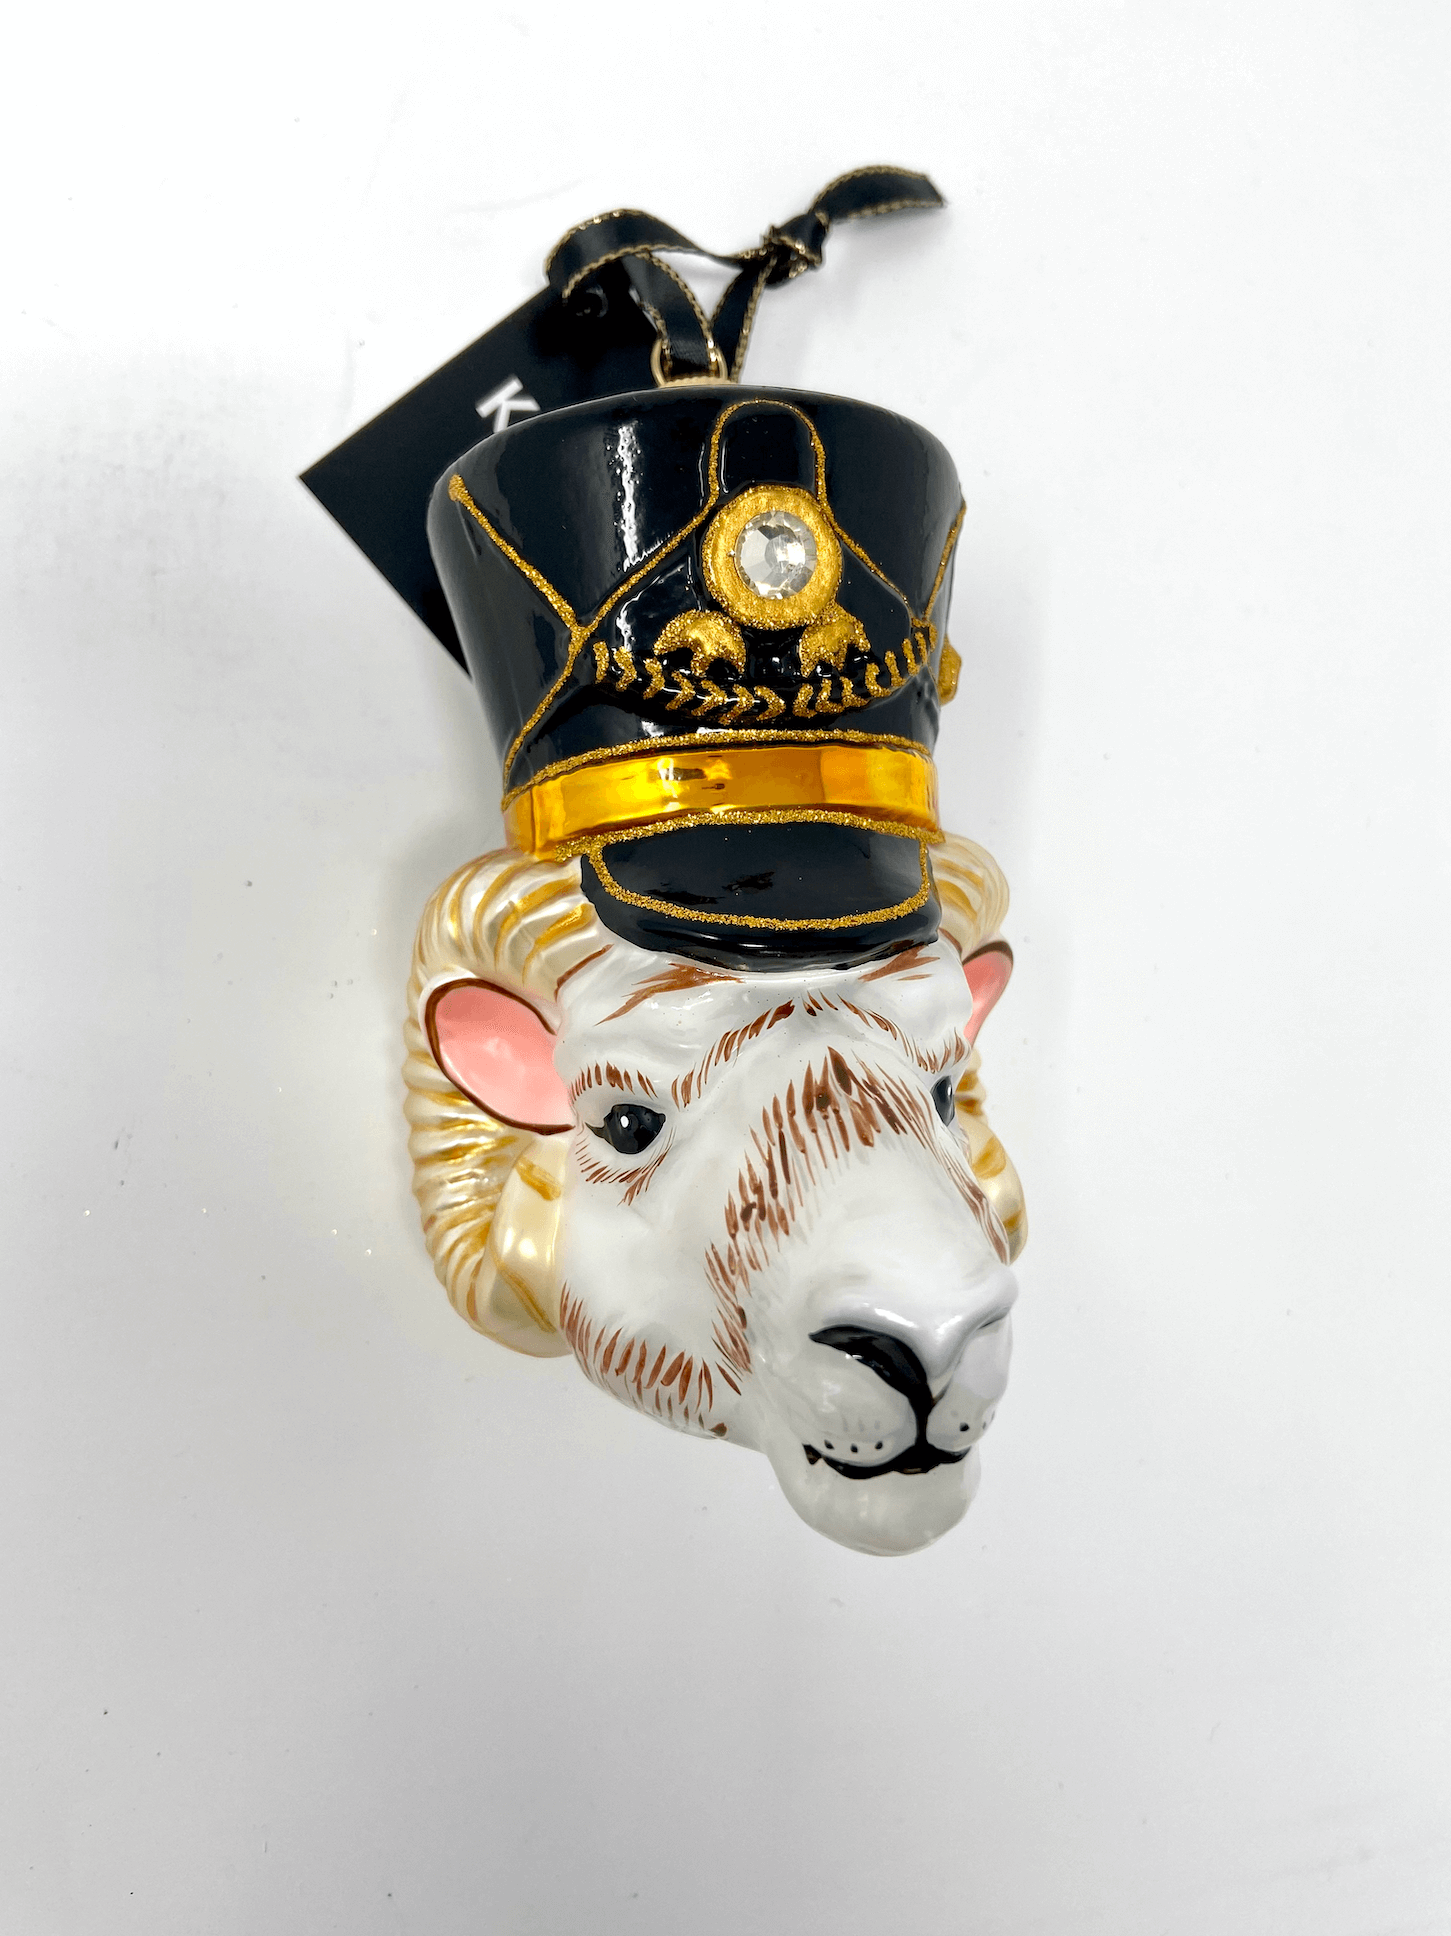 Ram head with nutcracker black cap and gold detailing. Polish glass christmas ornaments in saturated colors.